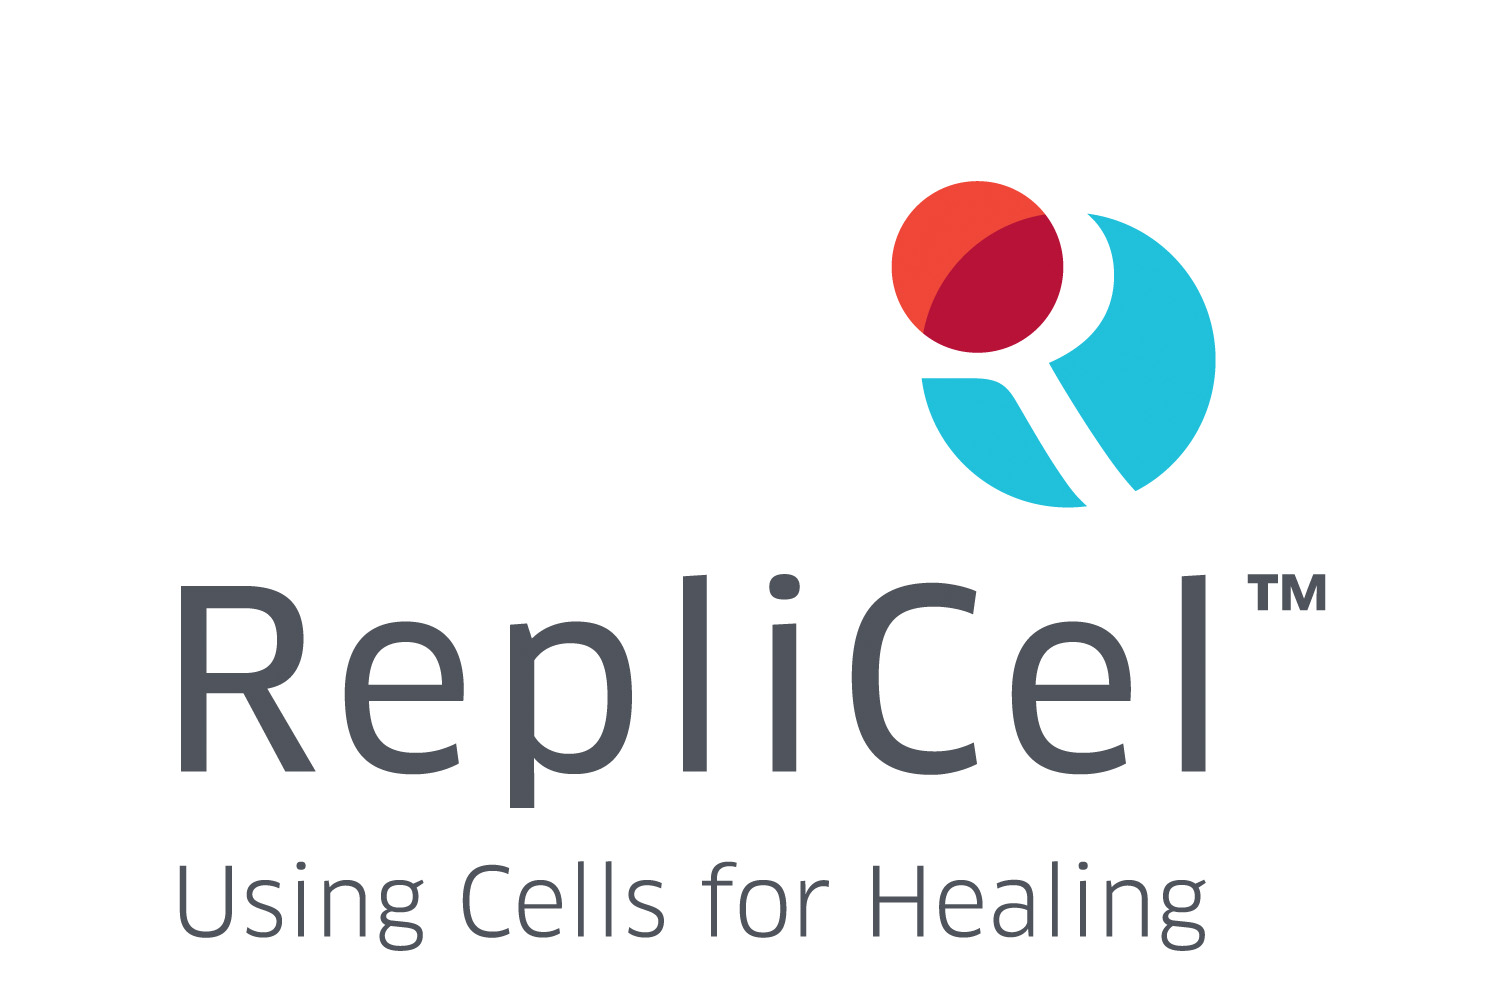 RepliCel Life Sciences, Inc., Tuesday, December 21, 2021, Press release picture